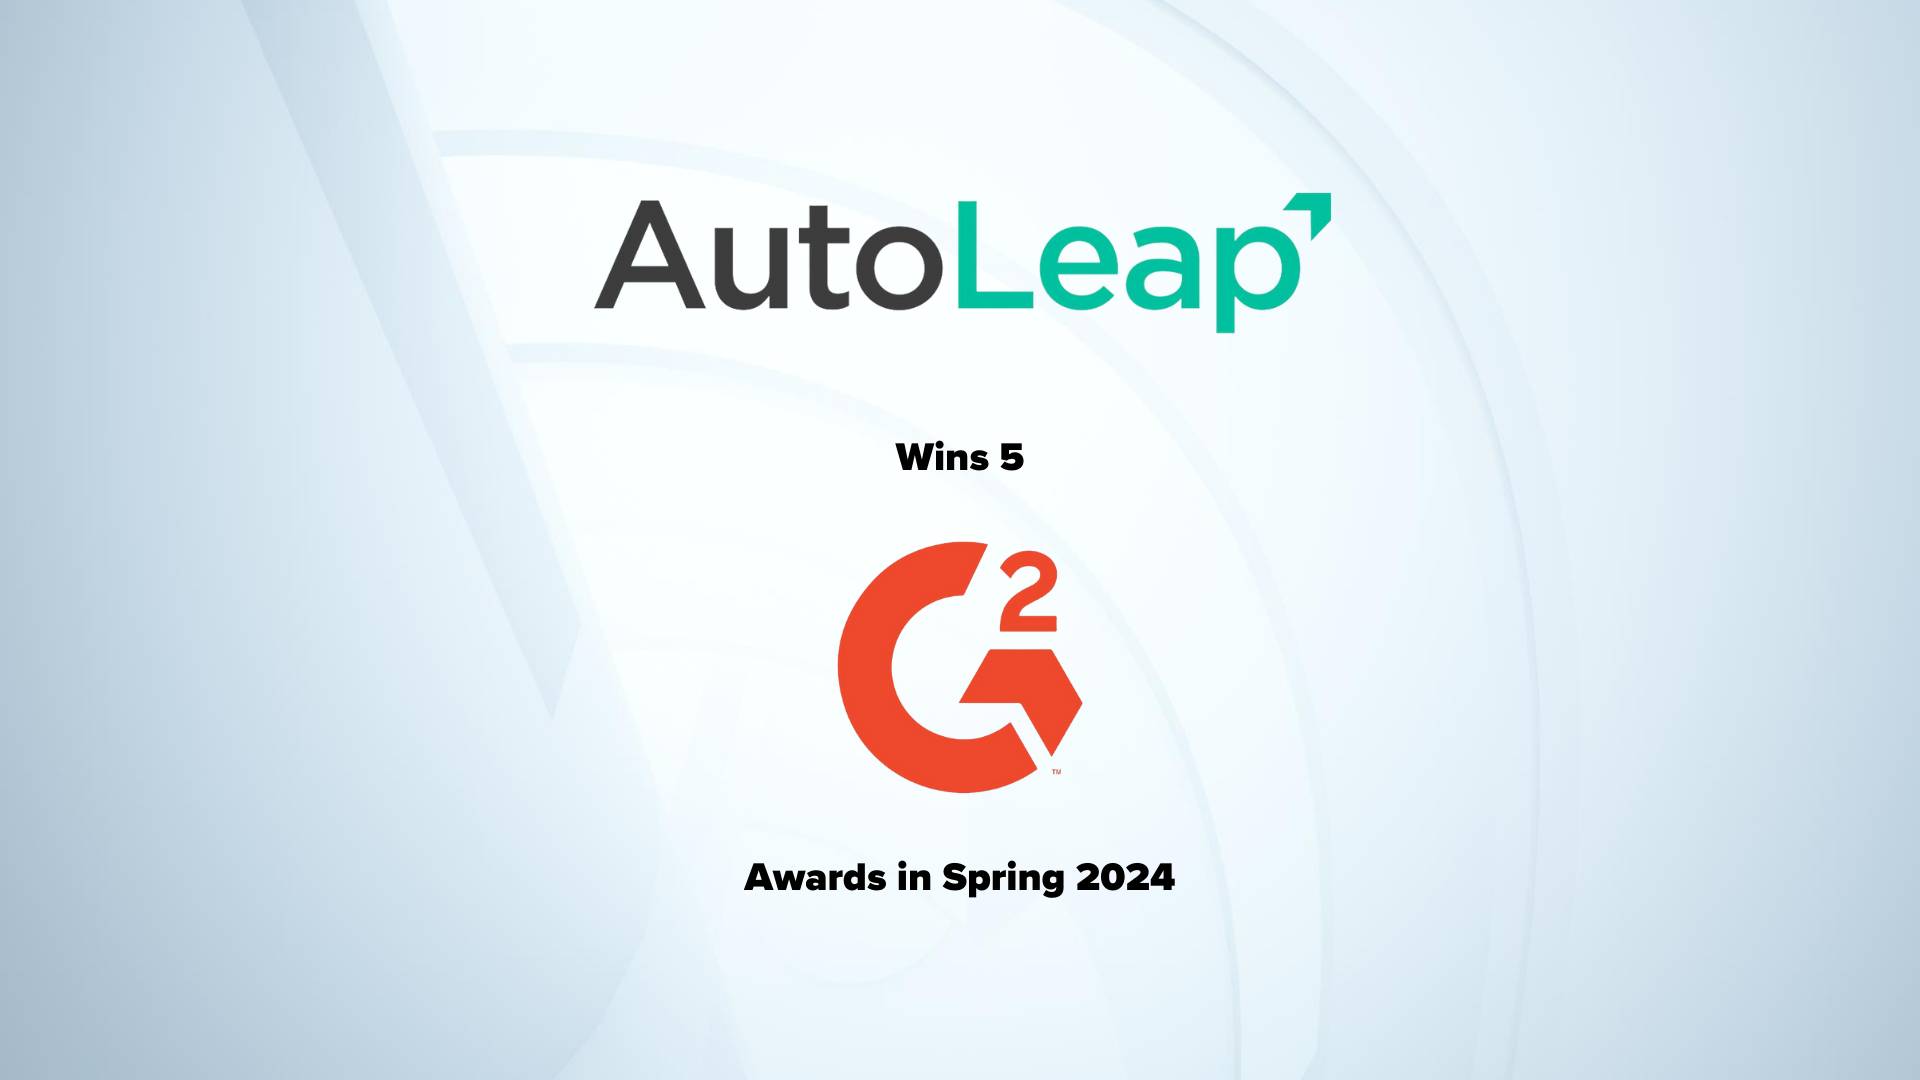 AutoLeap Wins 5 G2 Awards in Spring 2024